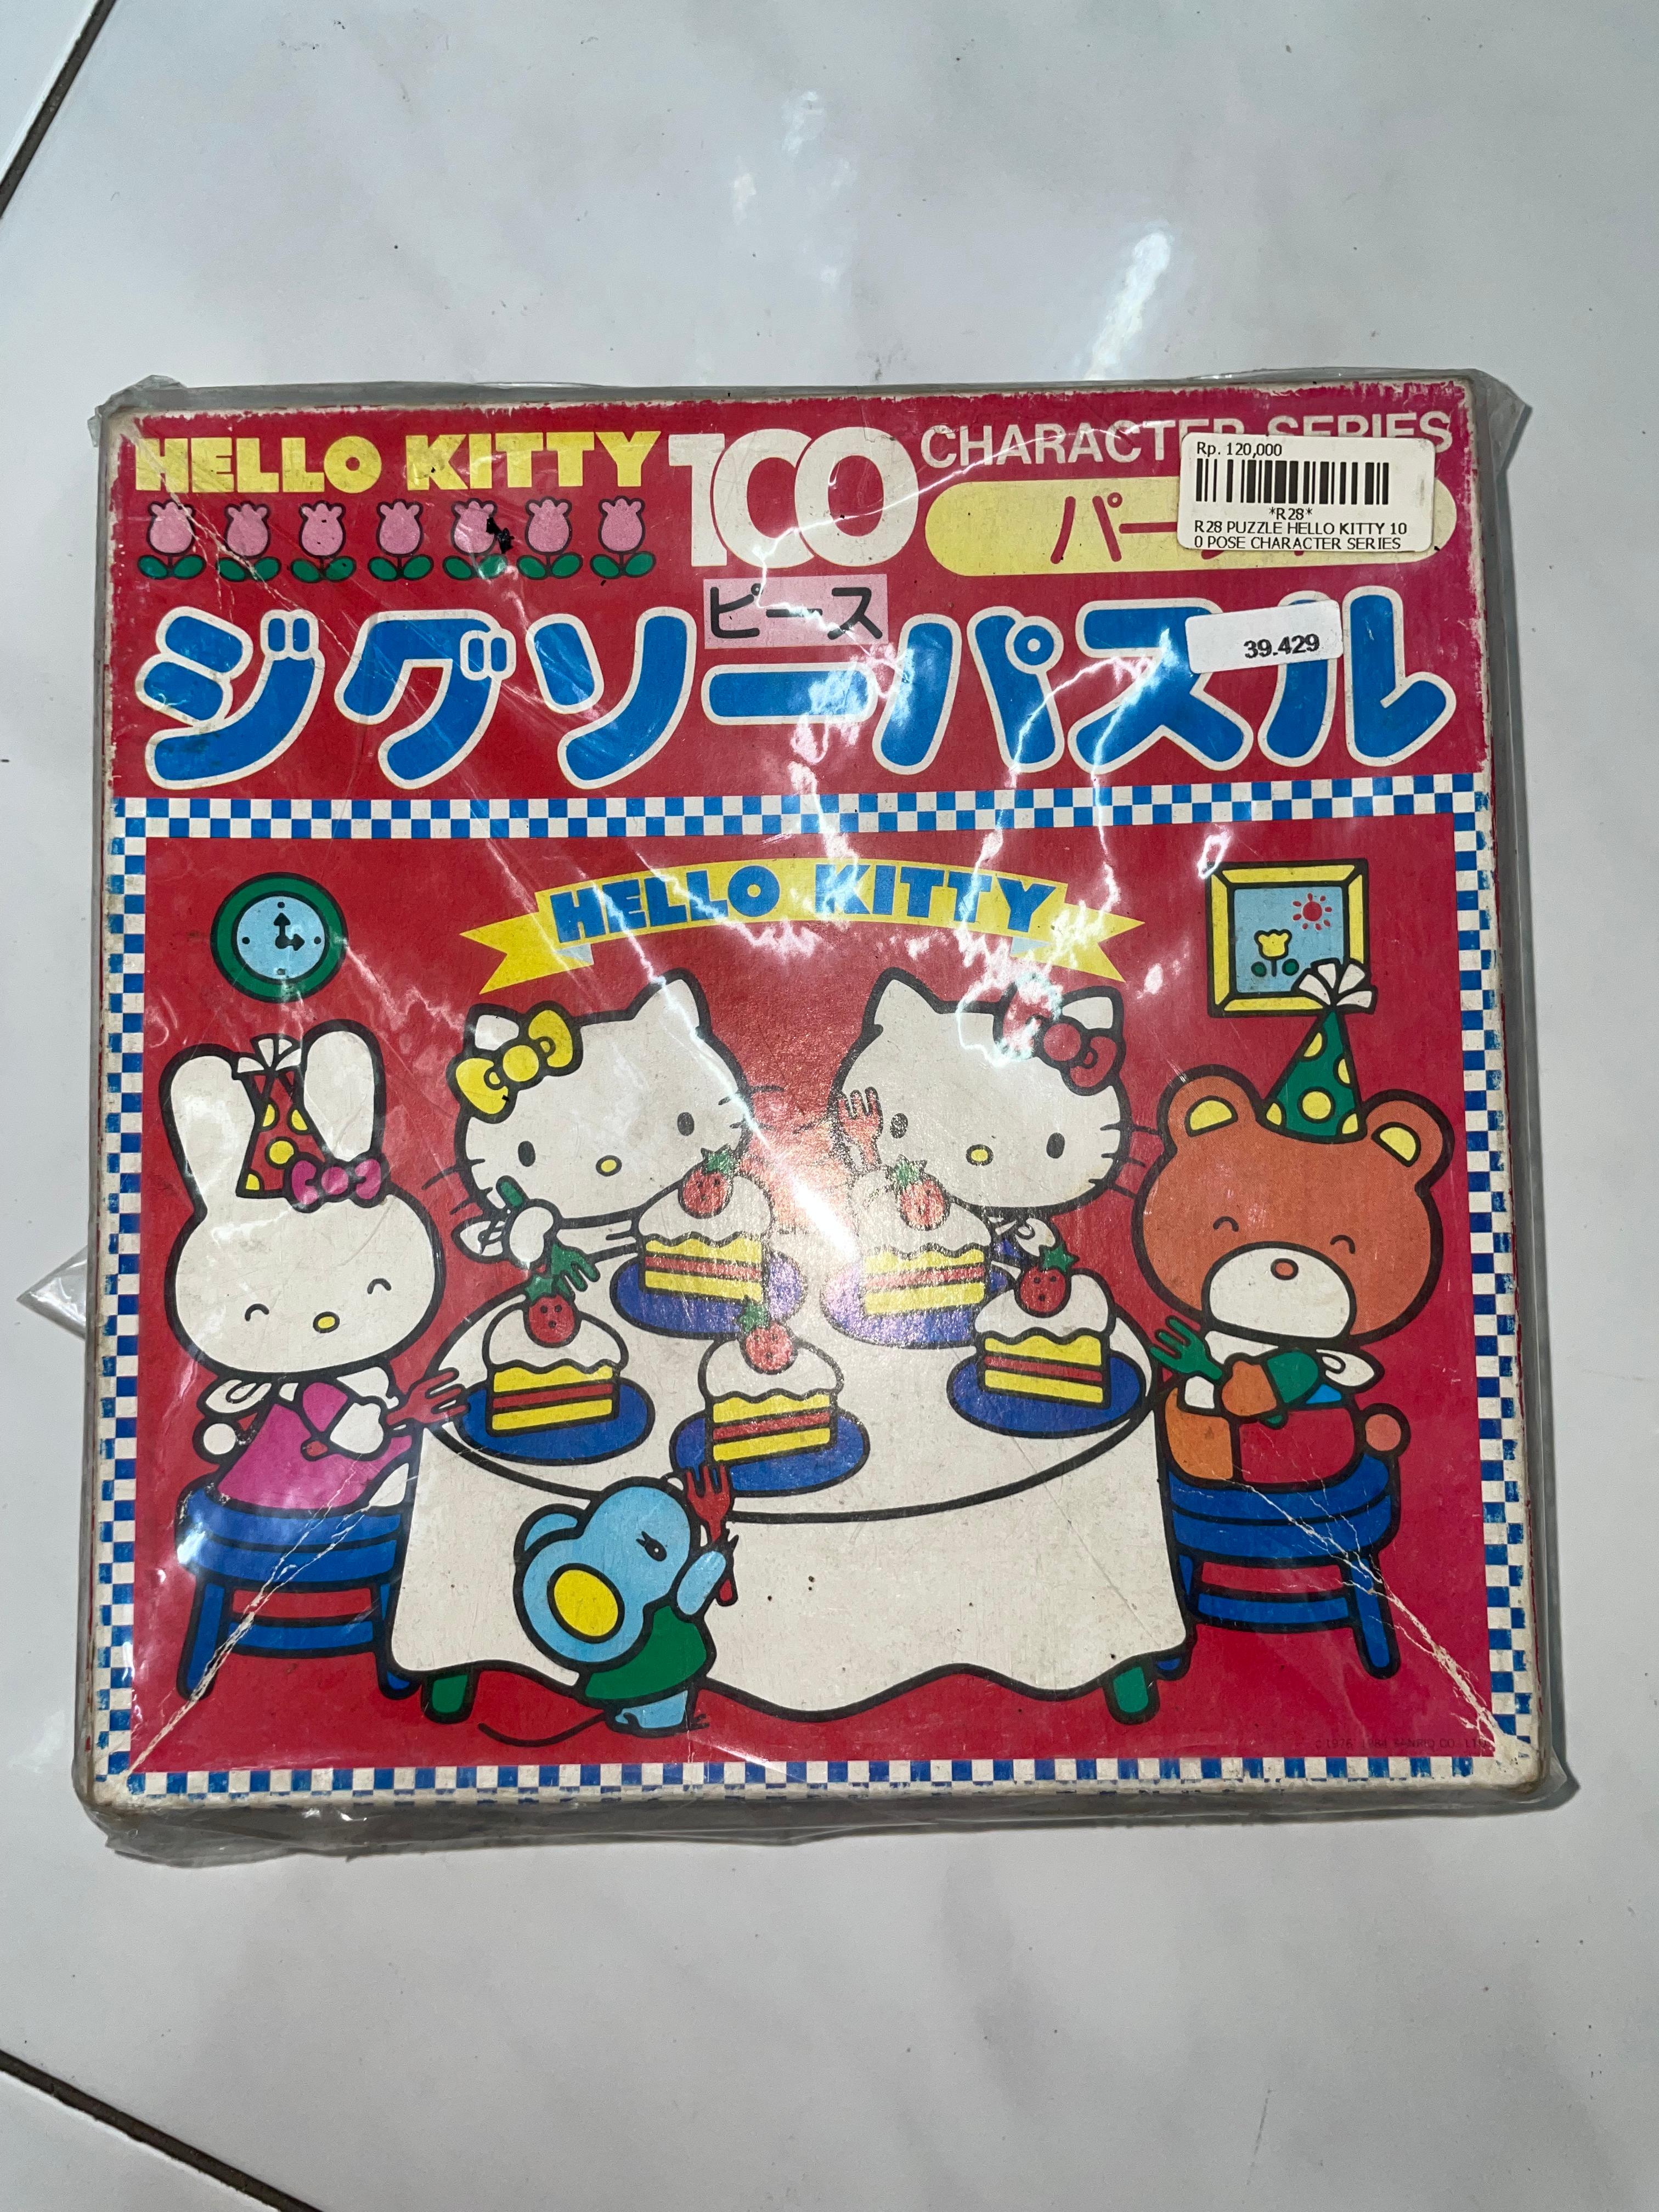 PUZZLE HELLO KITTY 10 POSE CHARACTERS SERIES